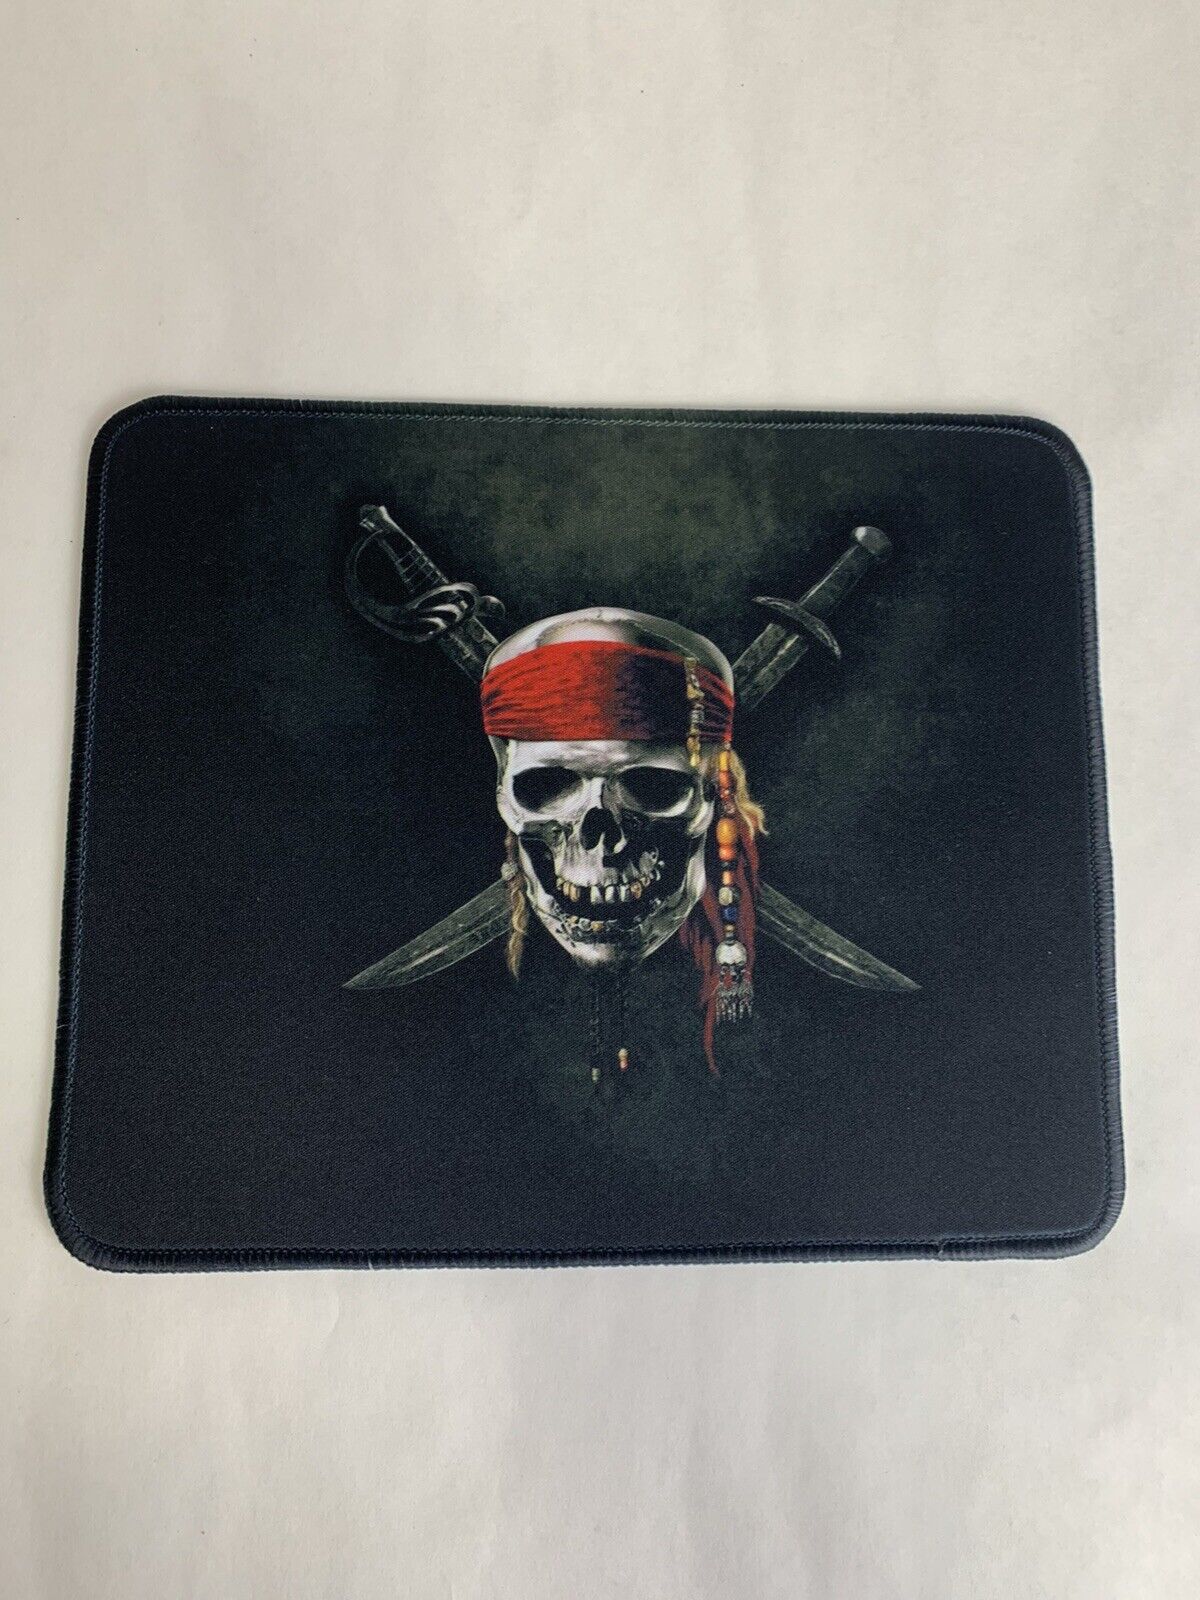 Jolly Roger Pirate Flag Mouse Pad - Caribbean Mousepad - Pirates Mouse Mat 